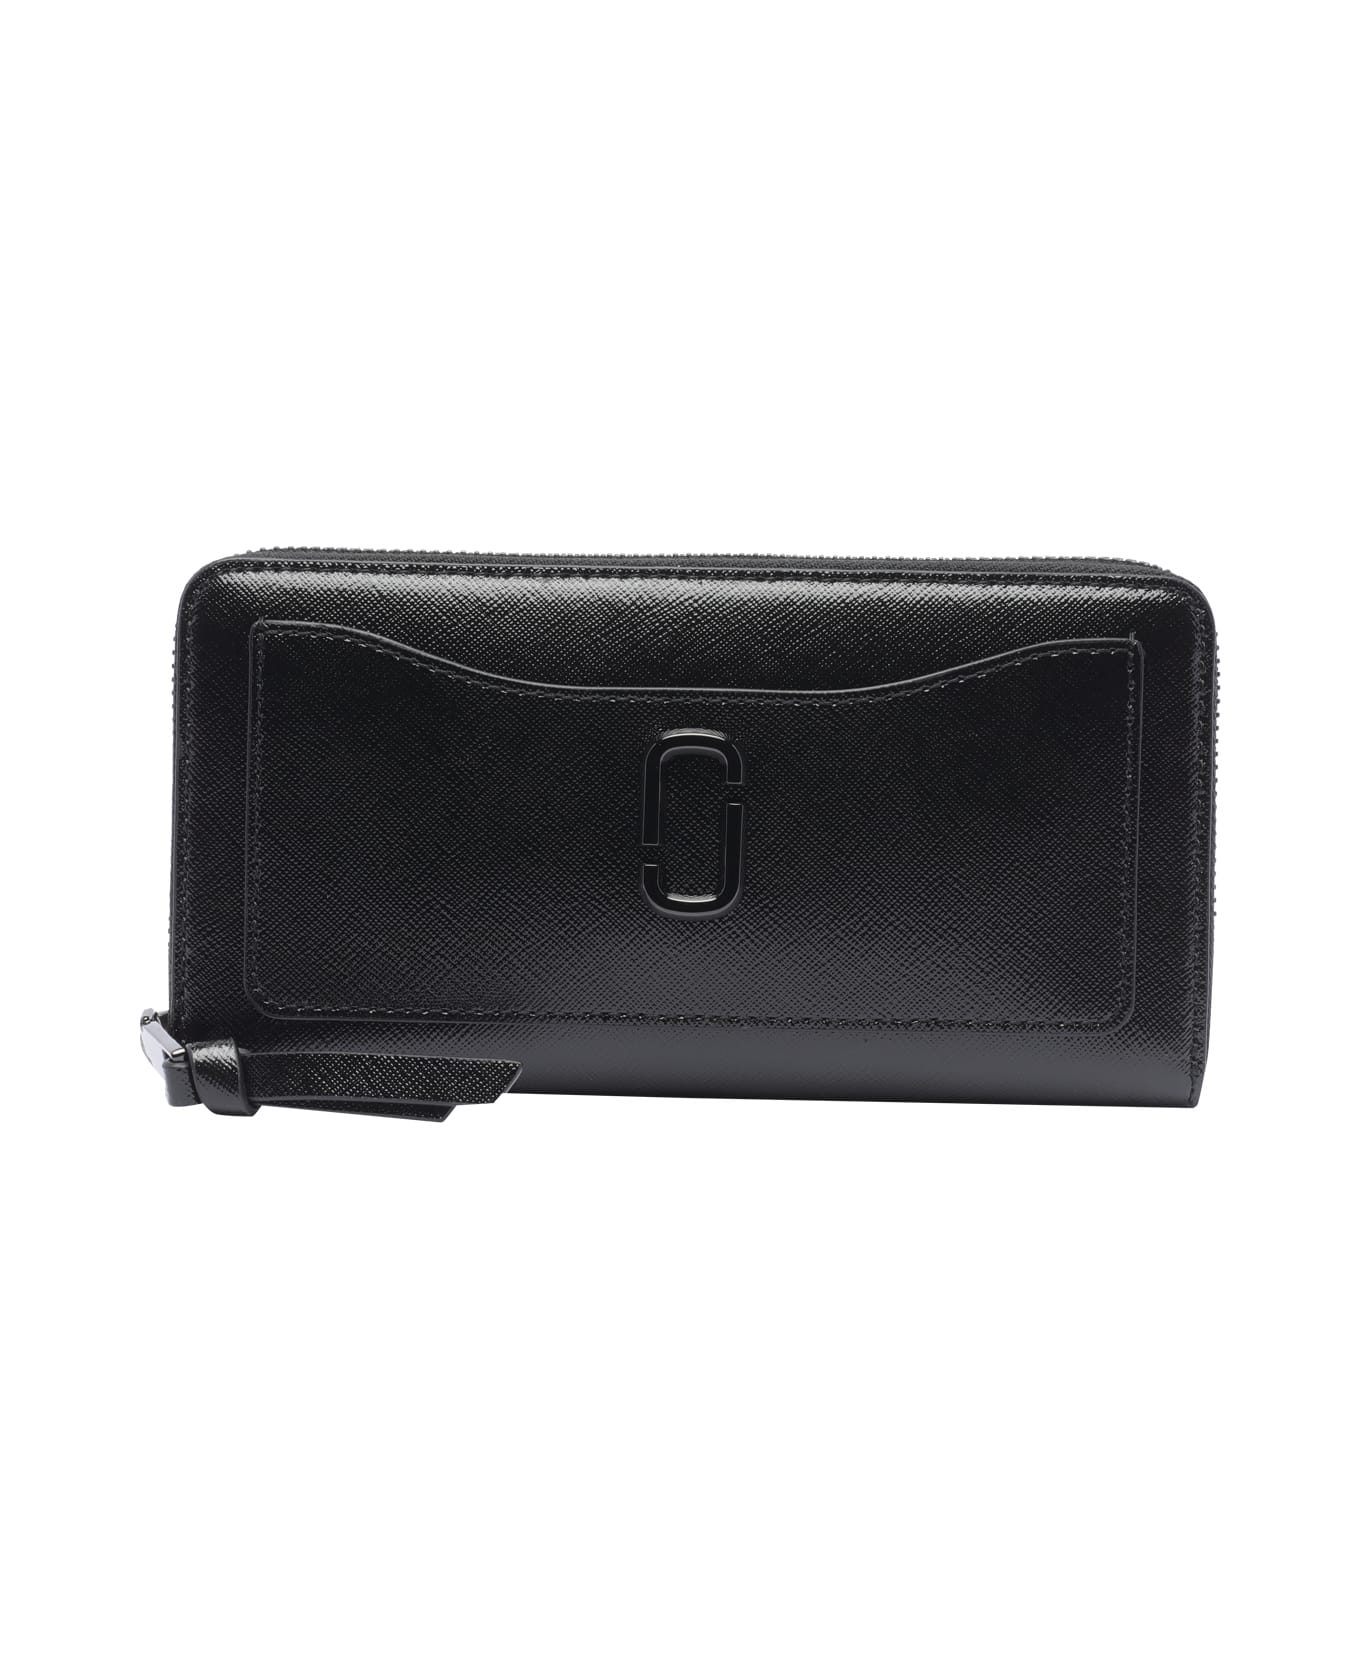 Marc Jacobs The Utility Snapshot Continental Wallet - Black 財布